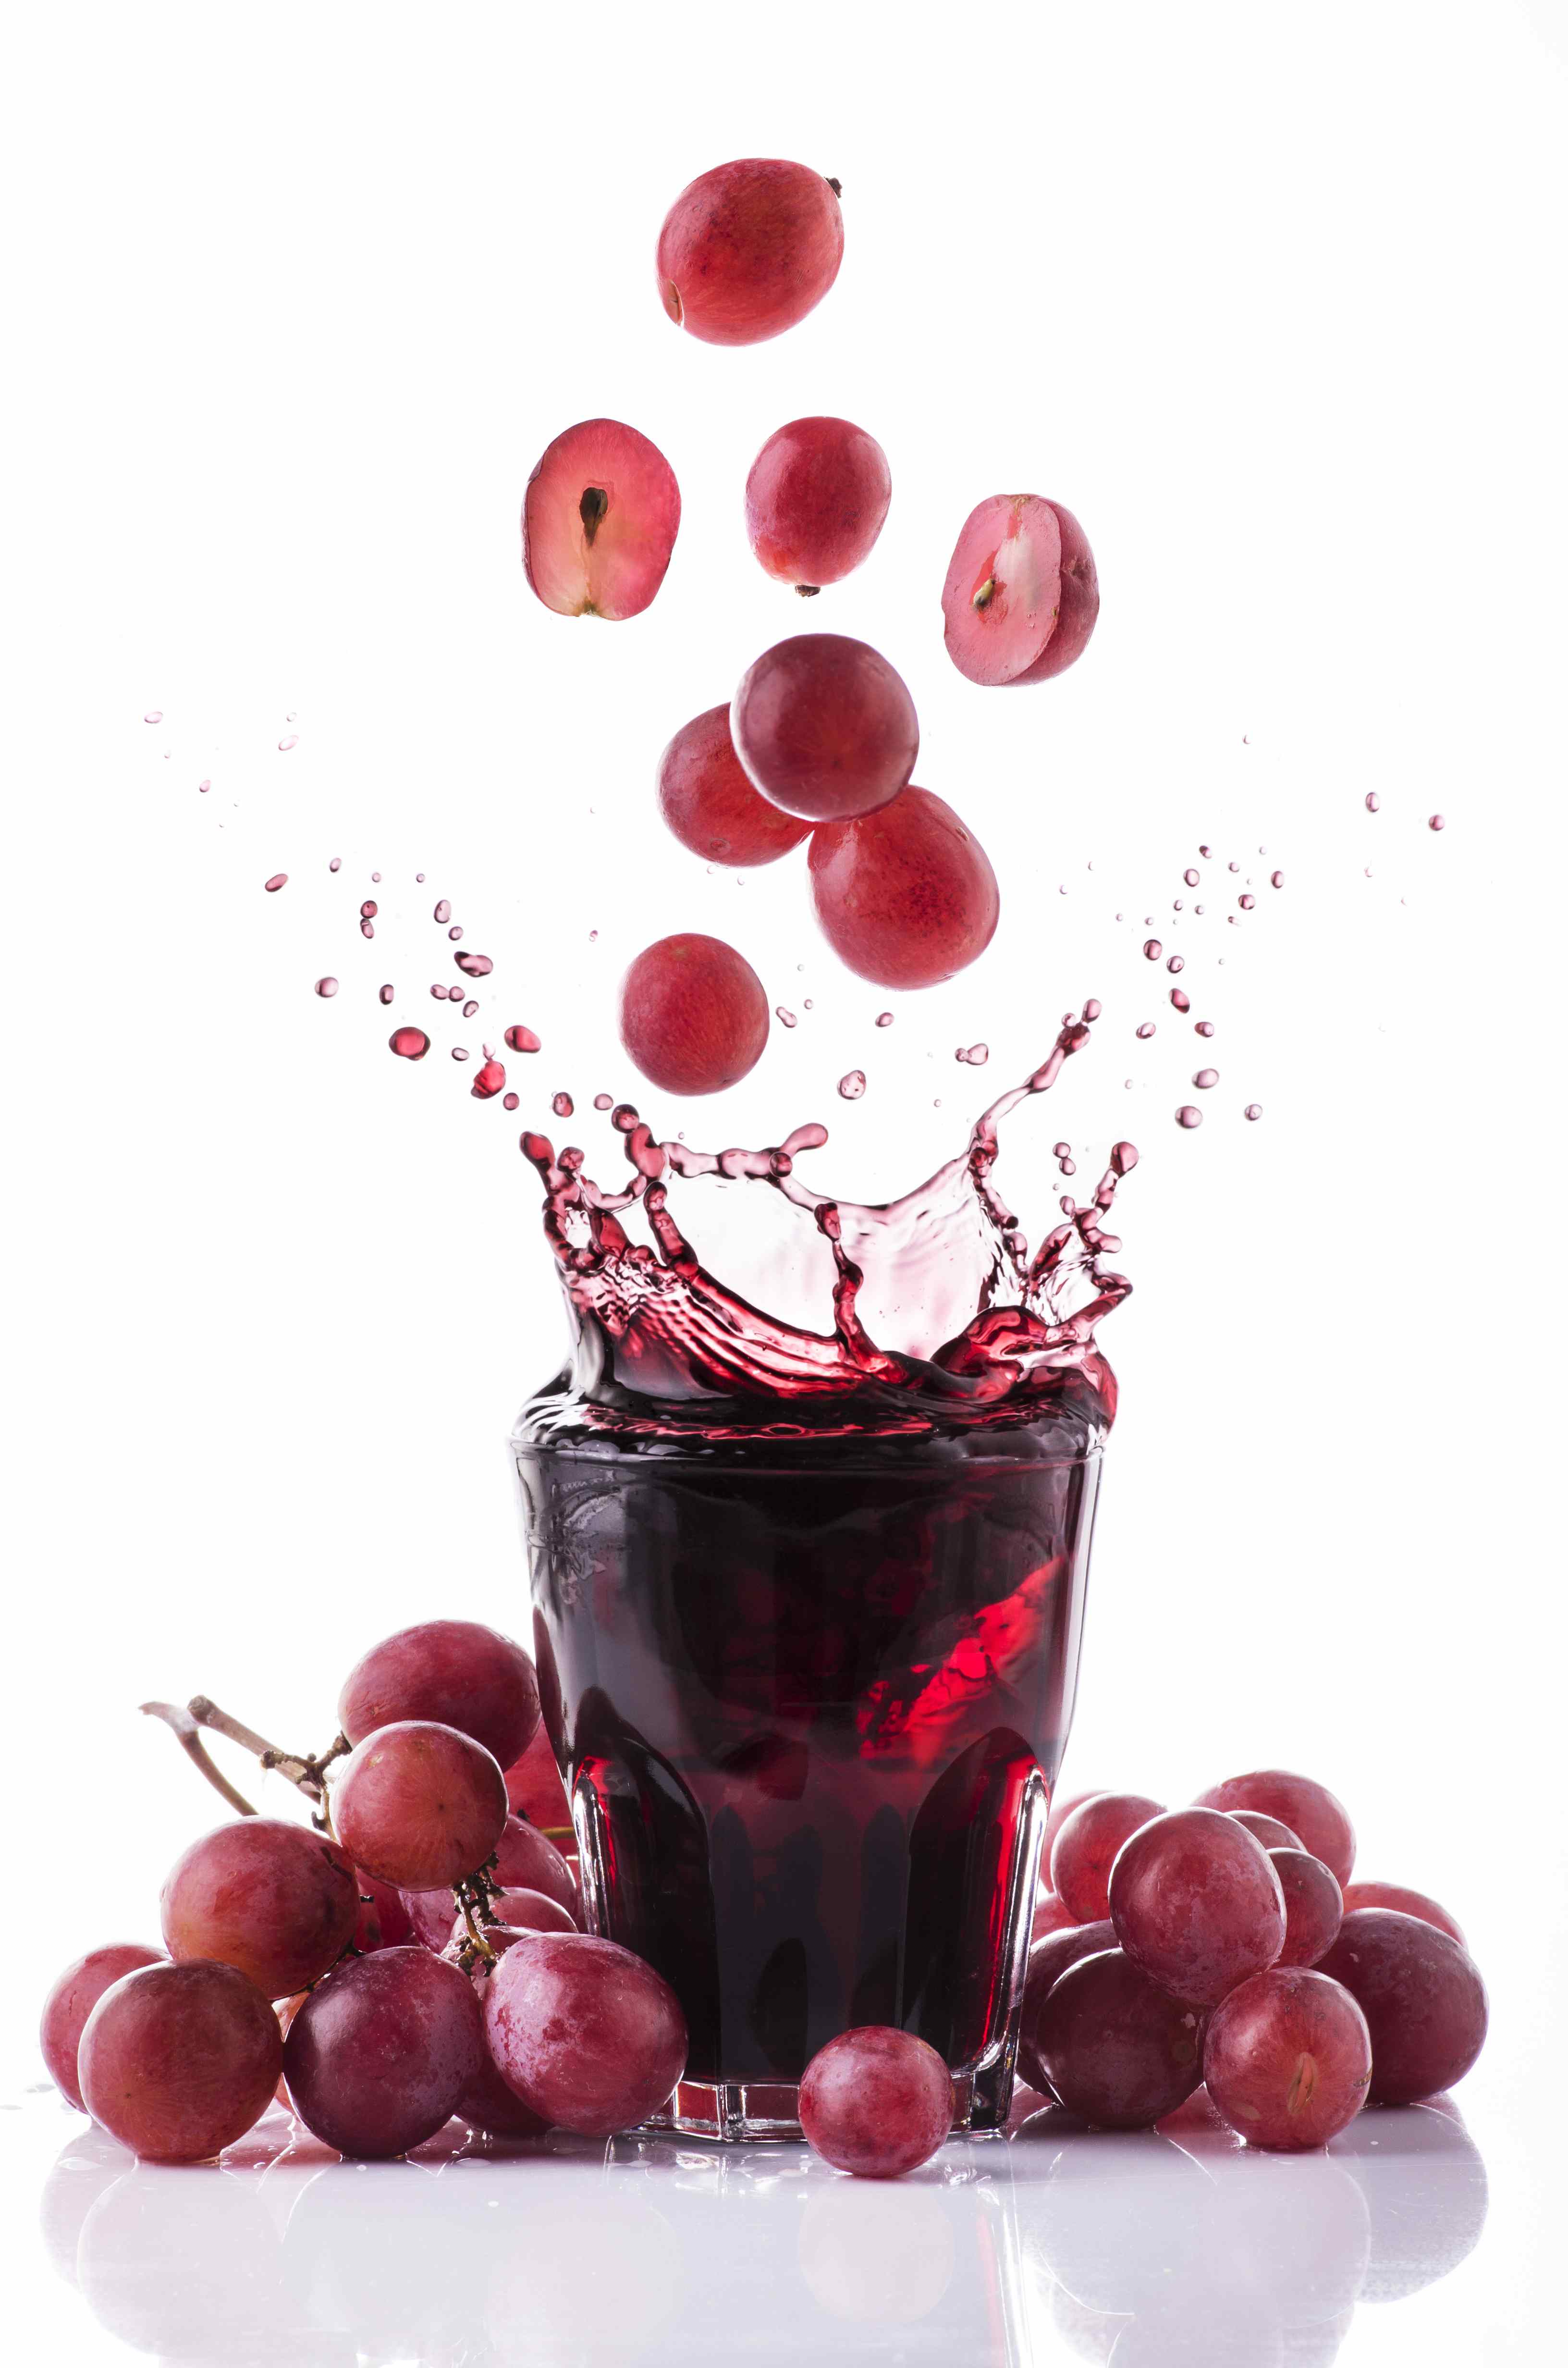 Grape Juice Wallpapers High Quality | Download Free